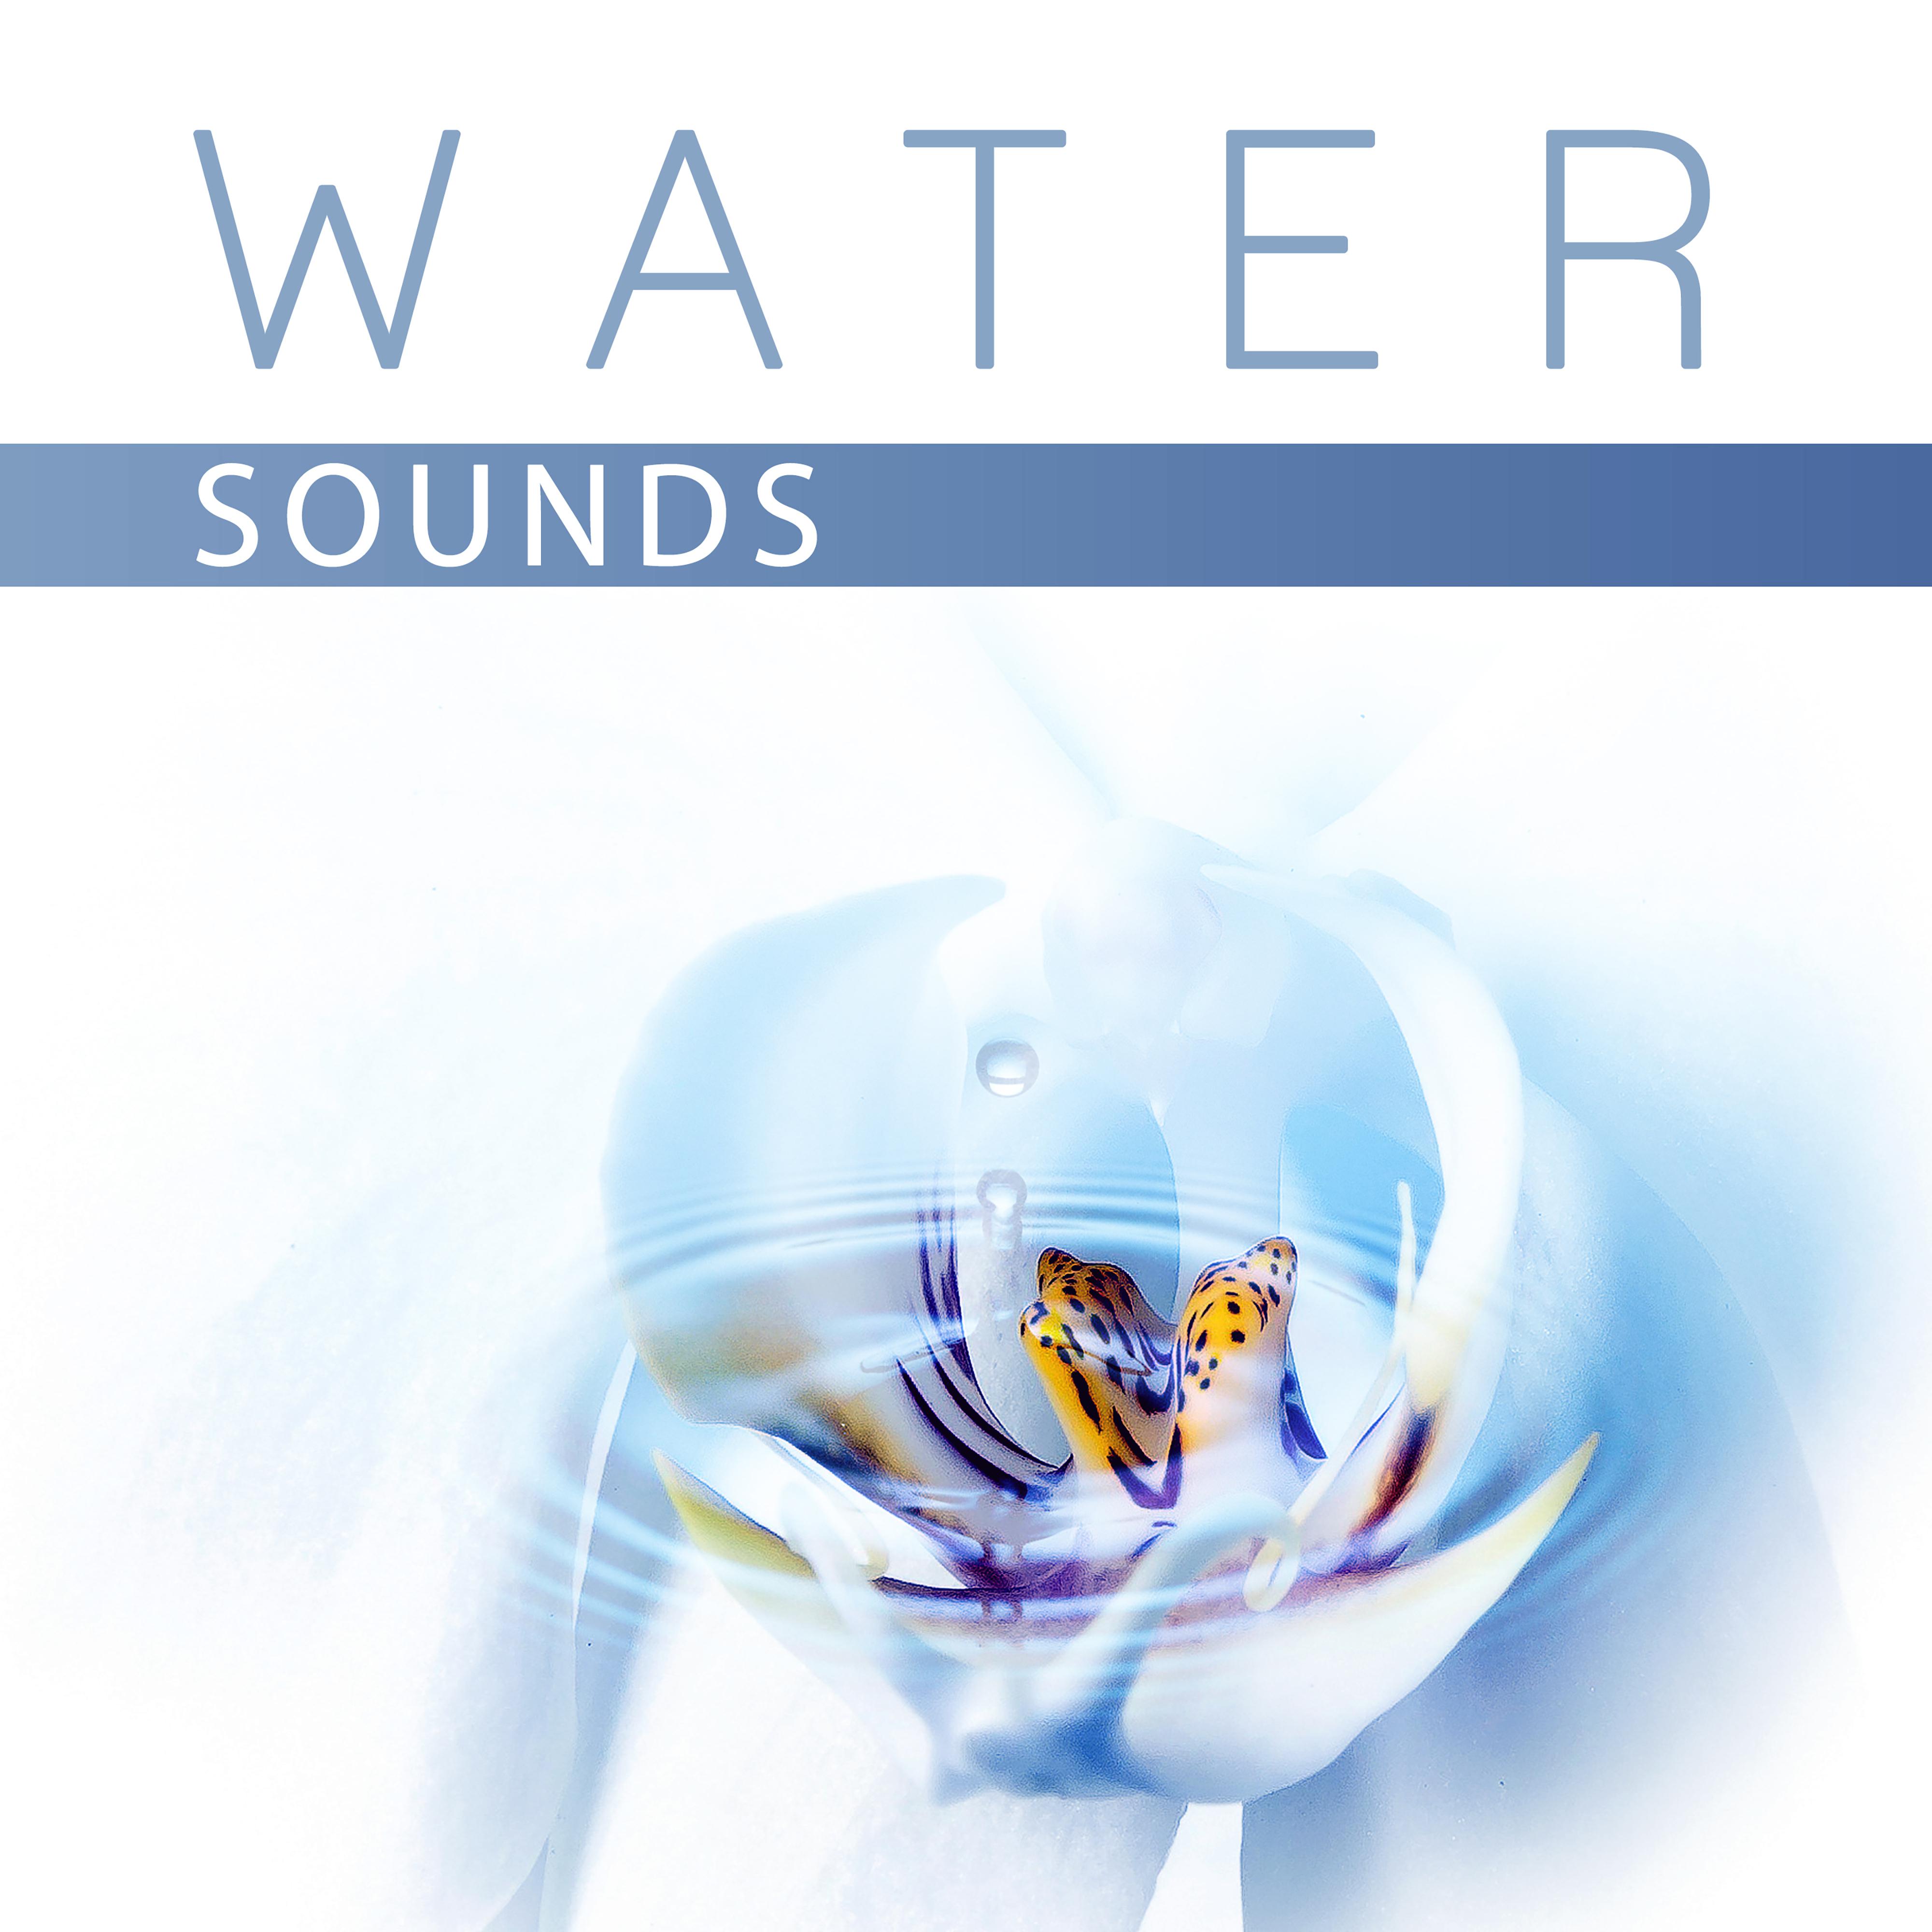 Water Sounds  Relaxation Music for Massage, Full Rest, Spa, Natural Sounds, Music for Spa